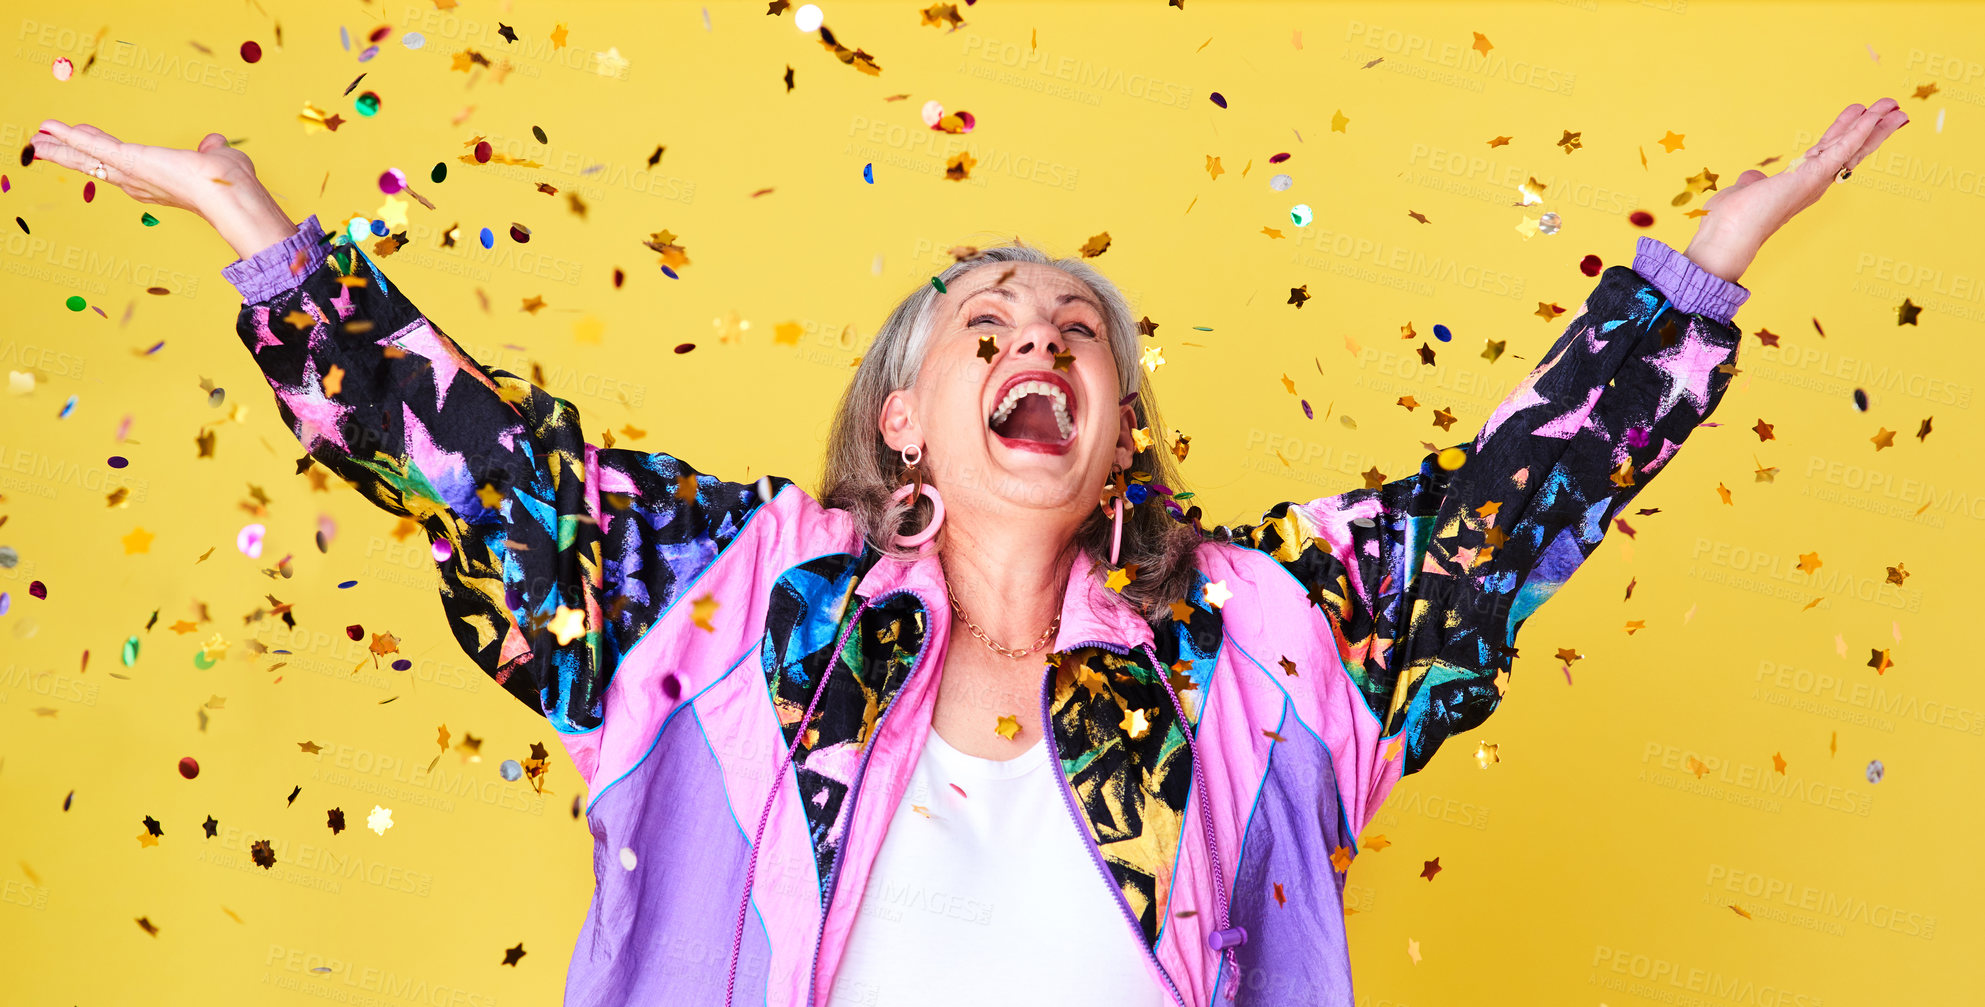 Buy stock photo Cropped shot of a cheerful and stylish senior woman celebrating with confetti falling over her against a yellow background